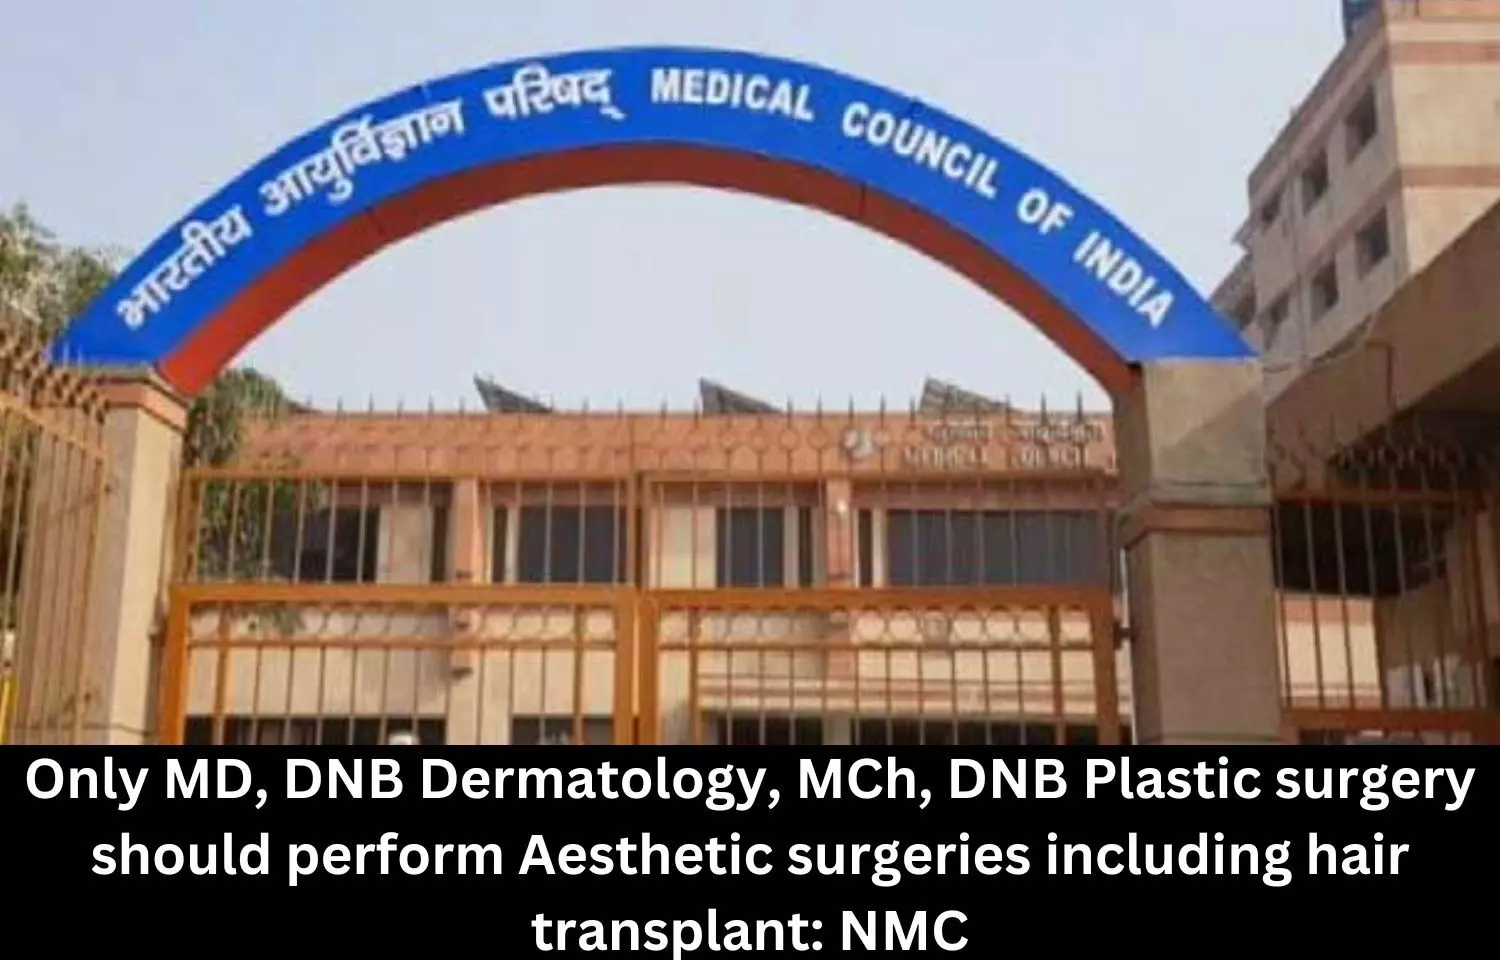 Only MD, DNB dermatology, MCh, DNB plastic surgery should perform aesthetic surgeries including hair transplant: NMC